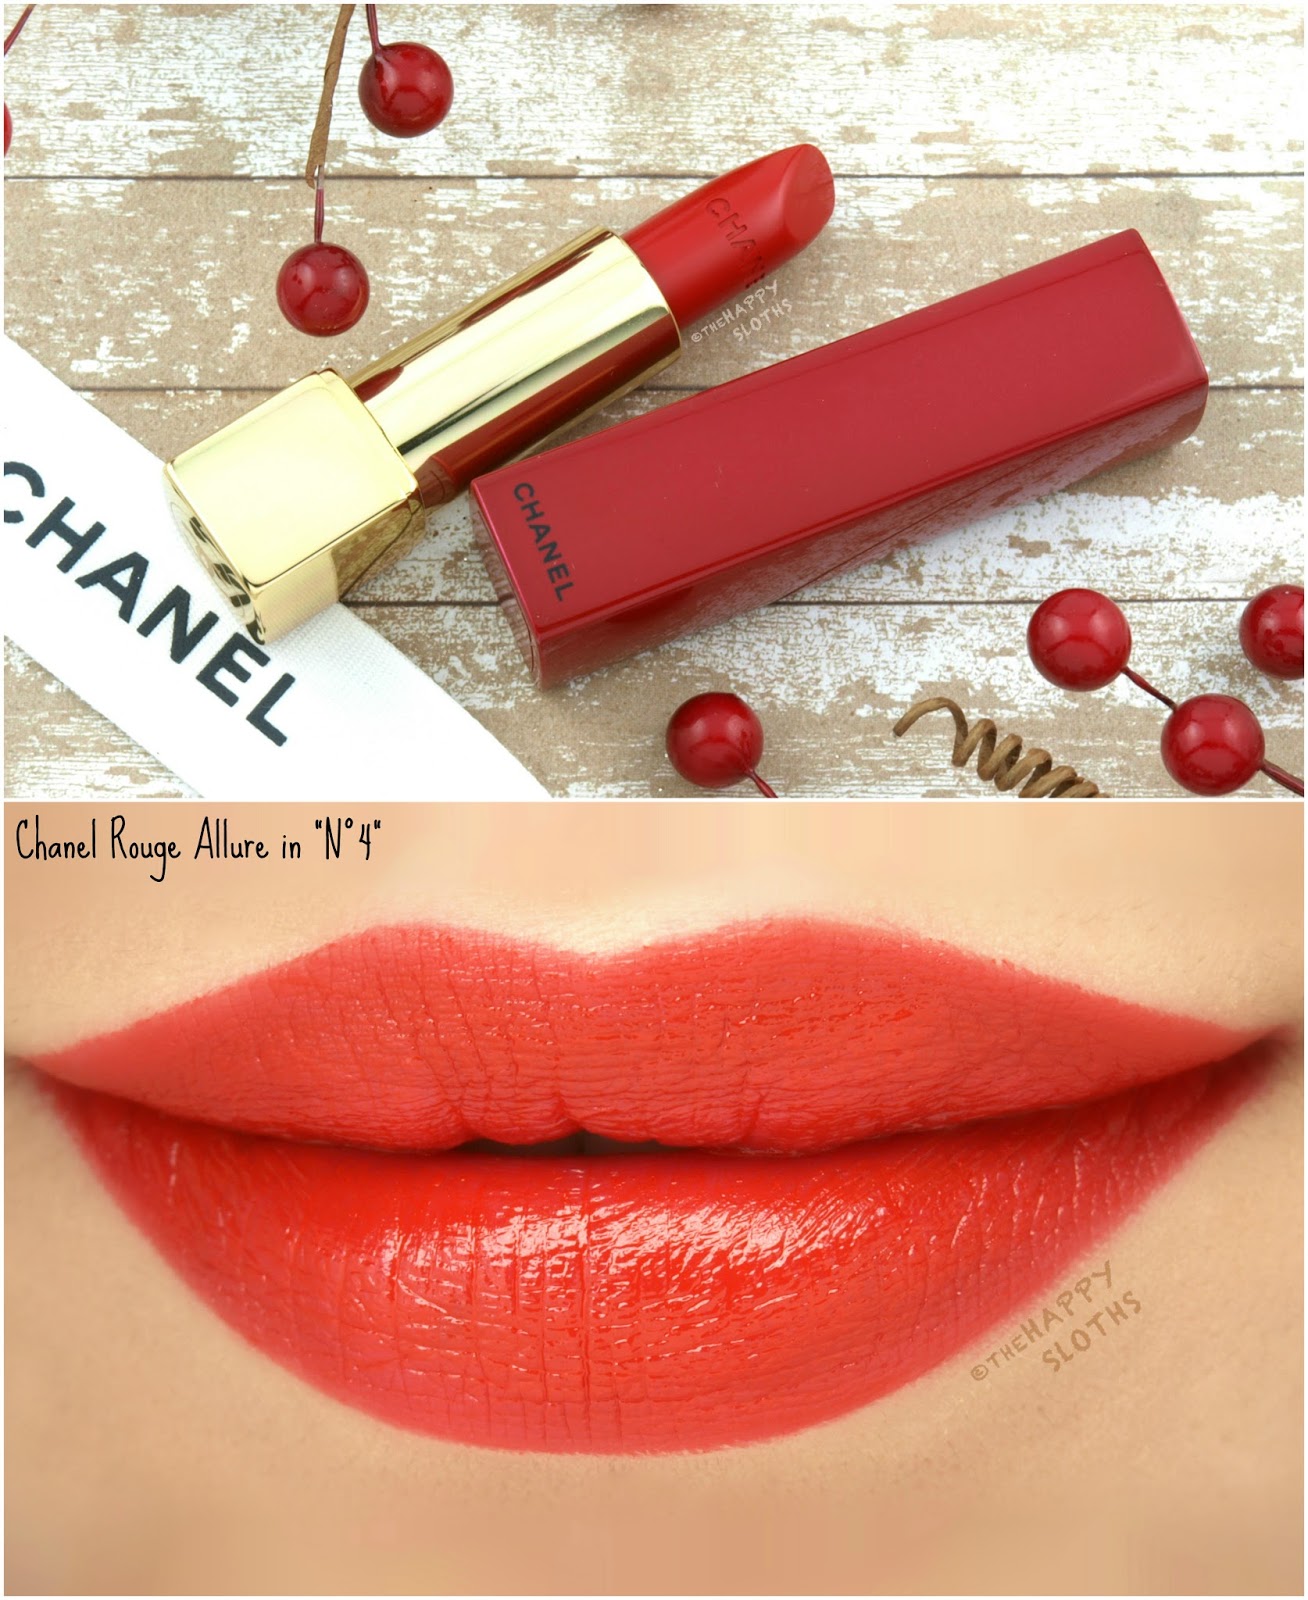 Chanel Holiday 2017 | Rouge Allure Lipstick in "N°4": Review and Swatches